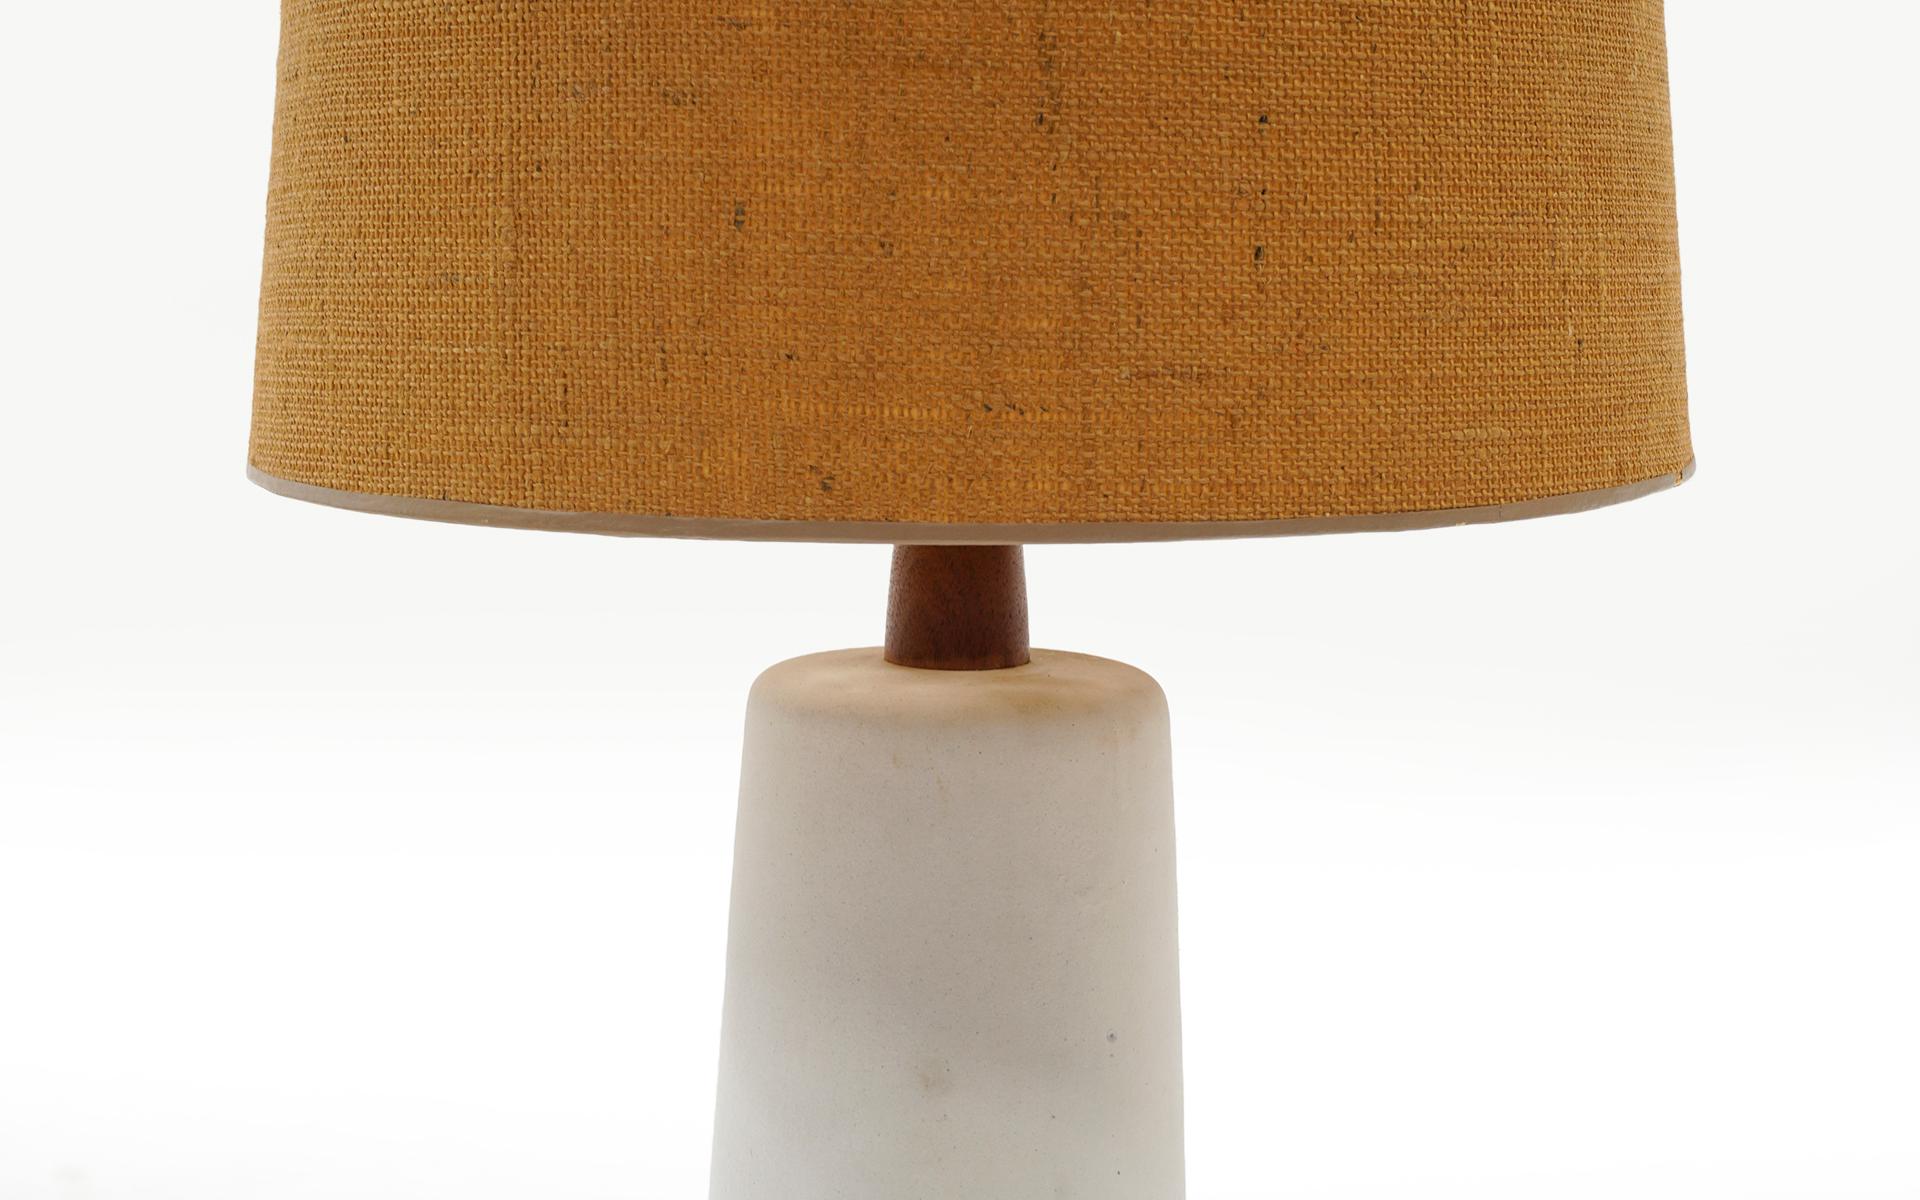 Table lamp designed by Gordon Martz. Ceramic body in off white and tan / taupe with the original shade and walnut finial. Signed Martz. Measures: Shade diameter 16 inches, base diameter 7 inches.